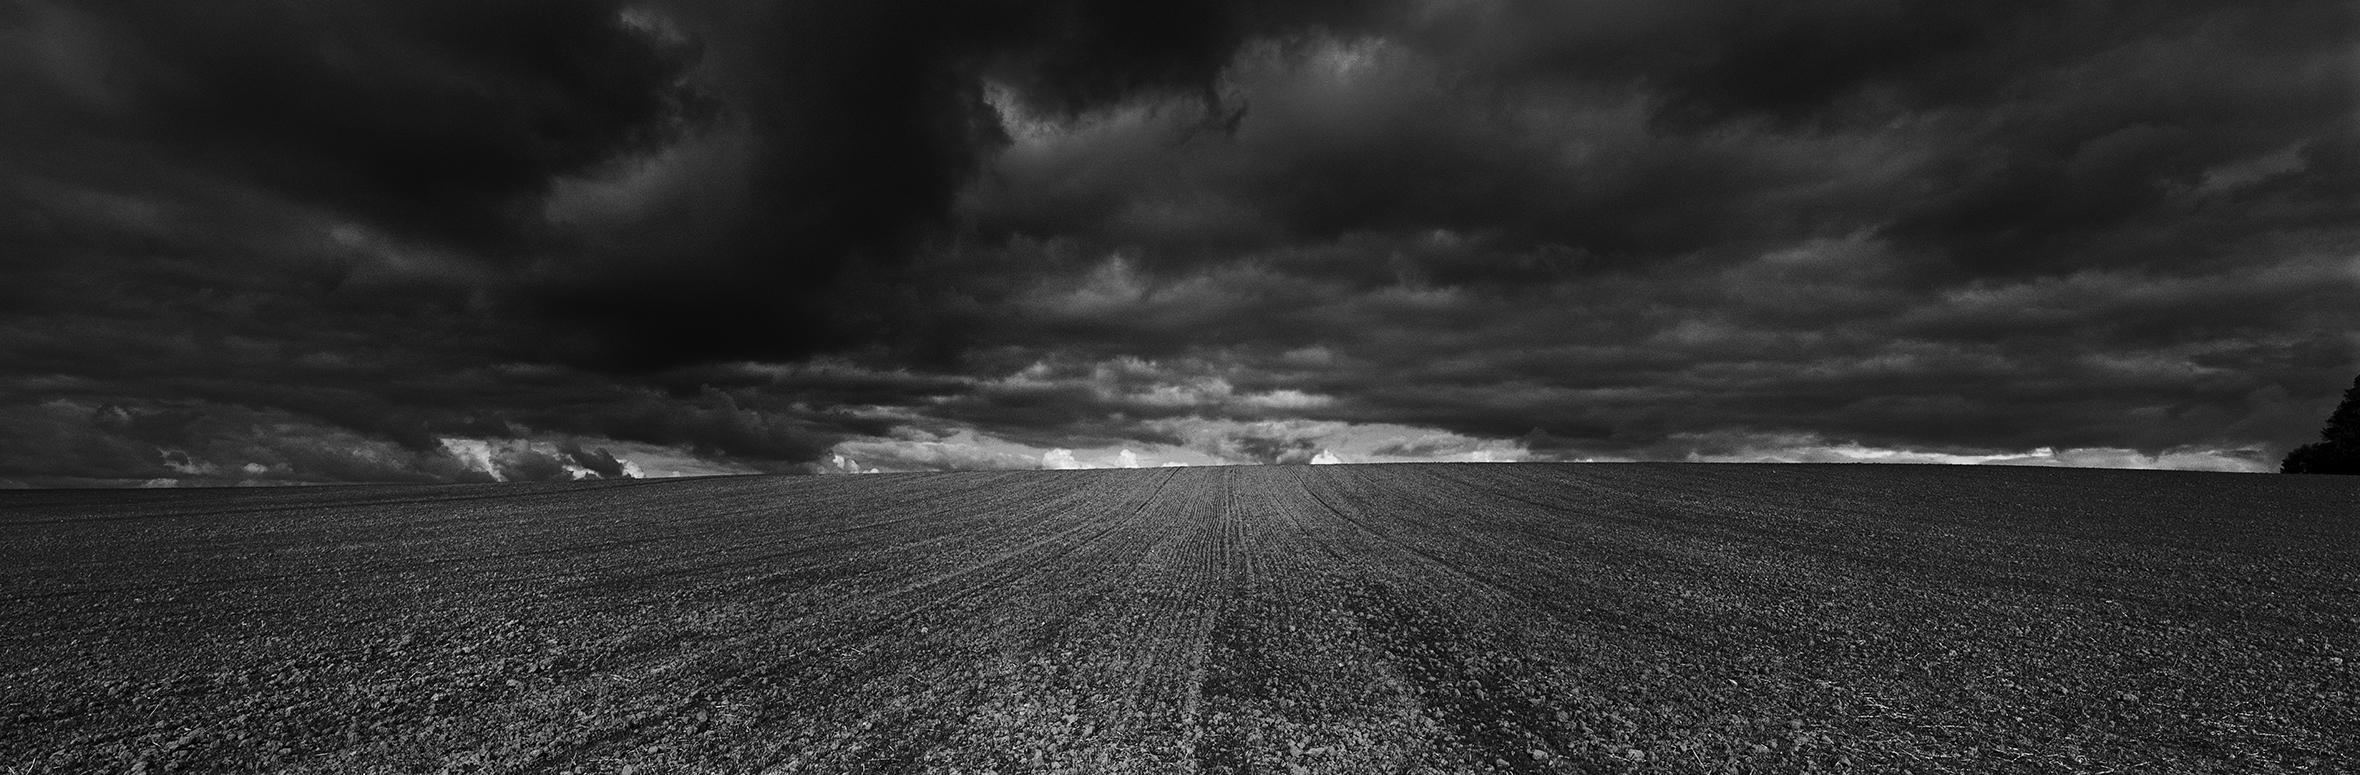 A wide-angle shot of a farm field and the vast sky full of dark clouds.